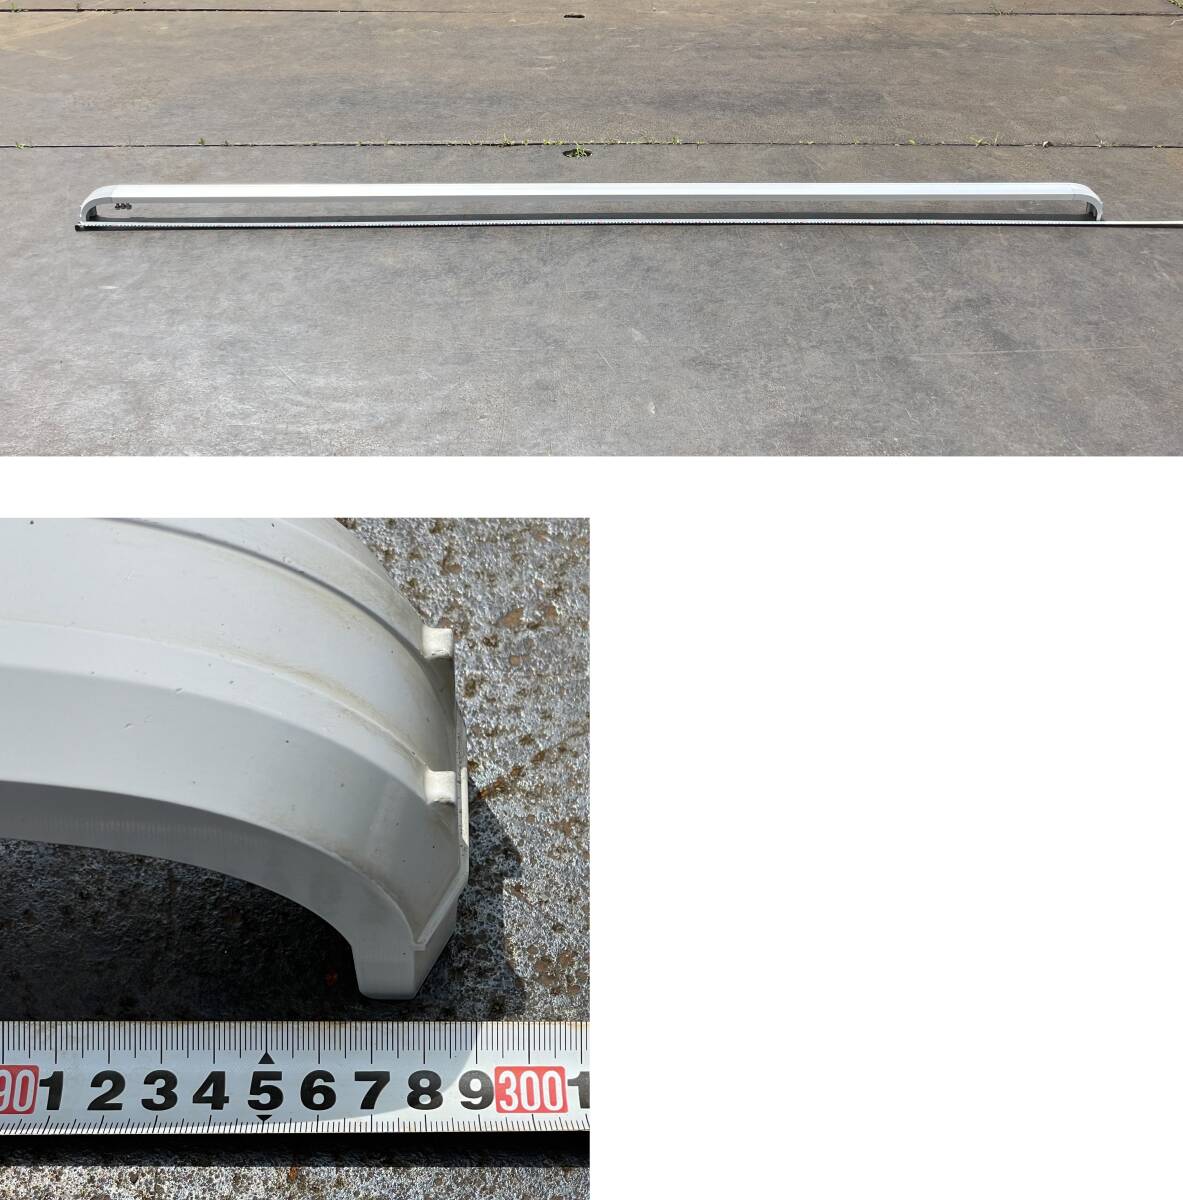  angle pipe *2990mm* 1 pcs * Japan Fruehauf * aluminium * side bumper for * side guard for * prompt decision * day single 21C